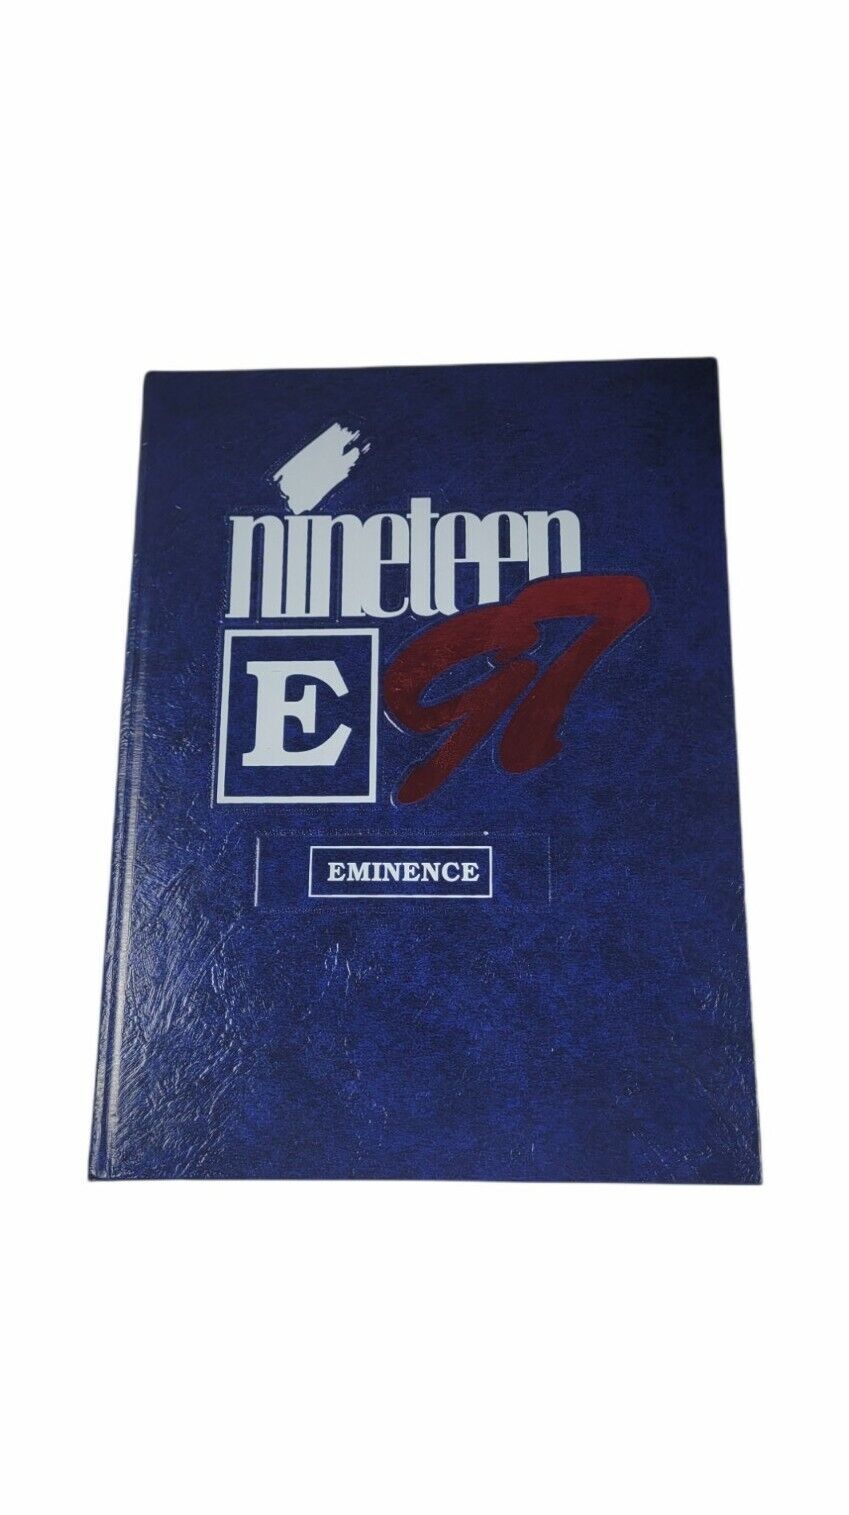 Vintage Yearbook: 1997 Eminence Indiana High School